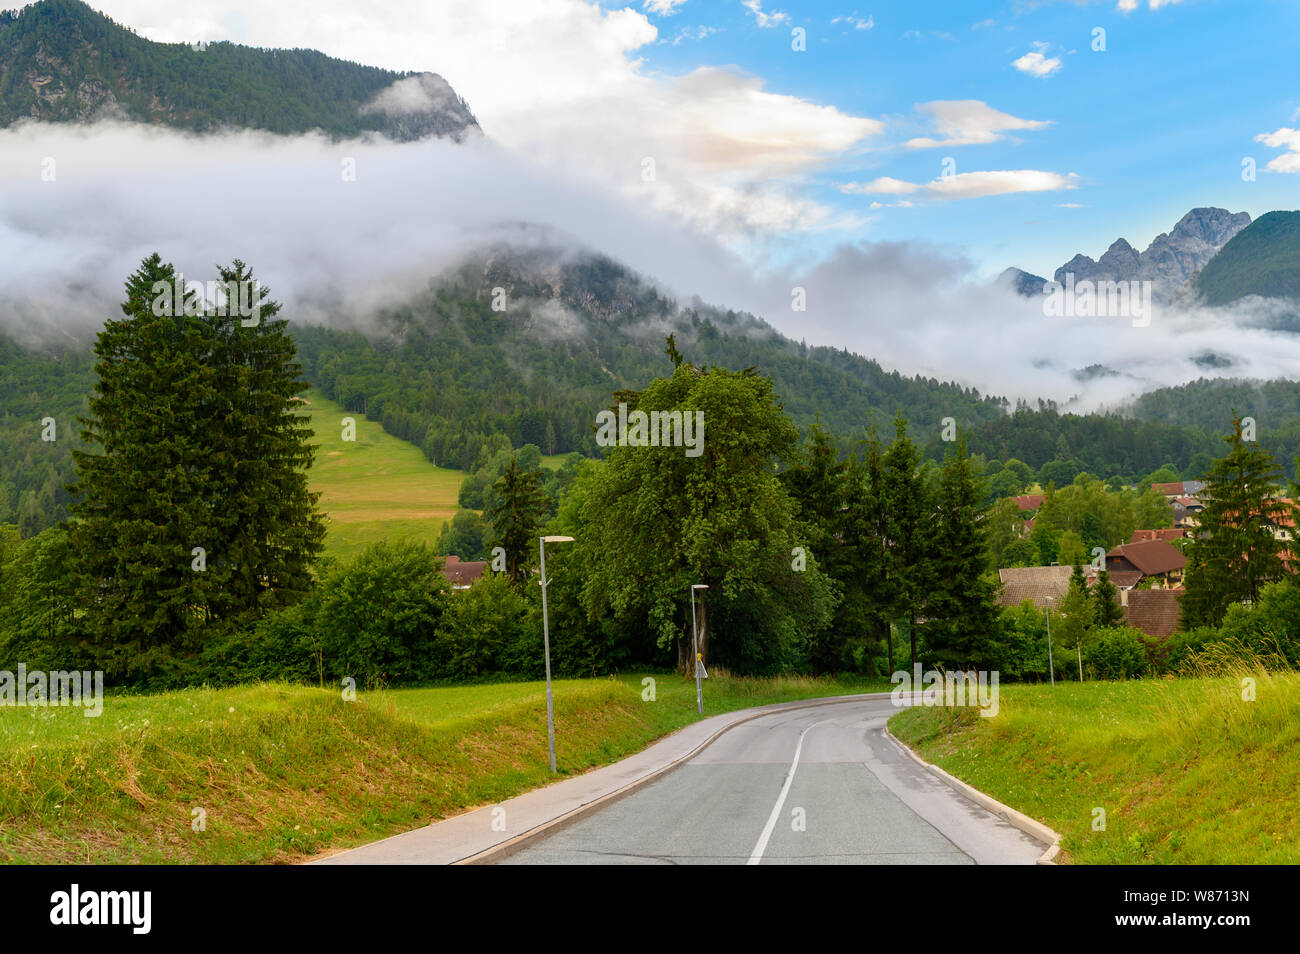 Sinuous road in mountains, cloudscape scenery Stock Photo